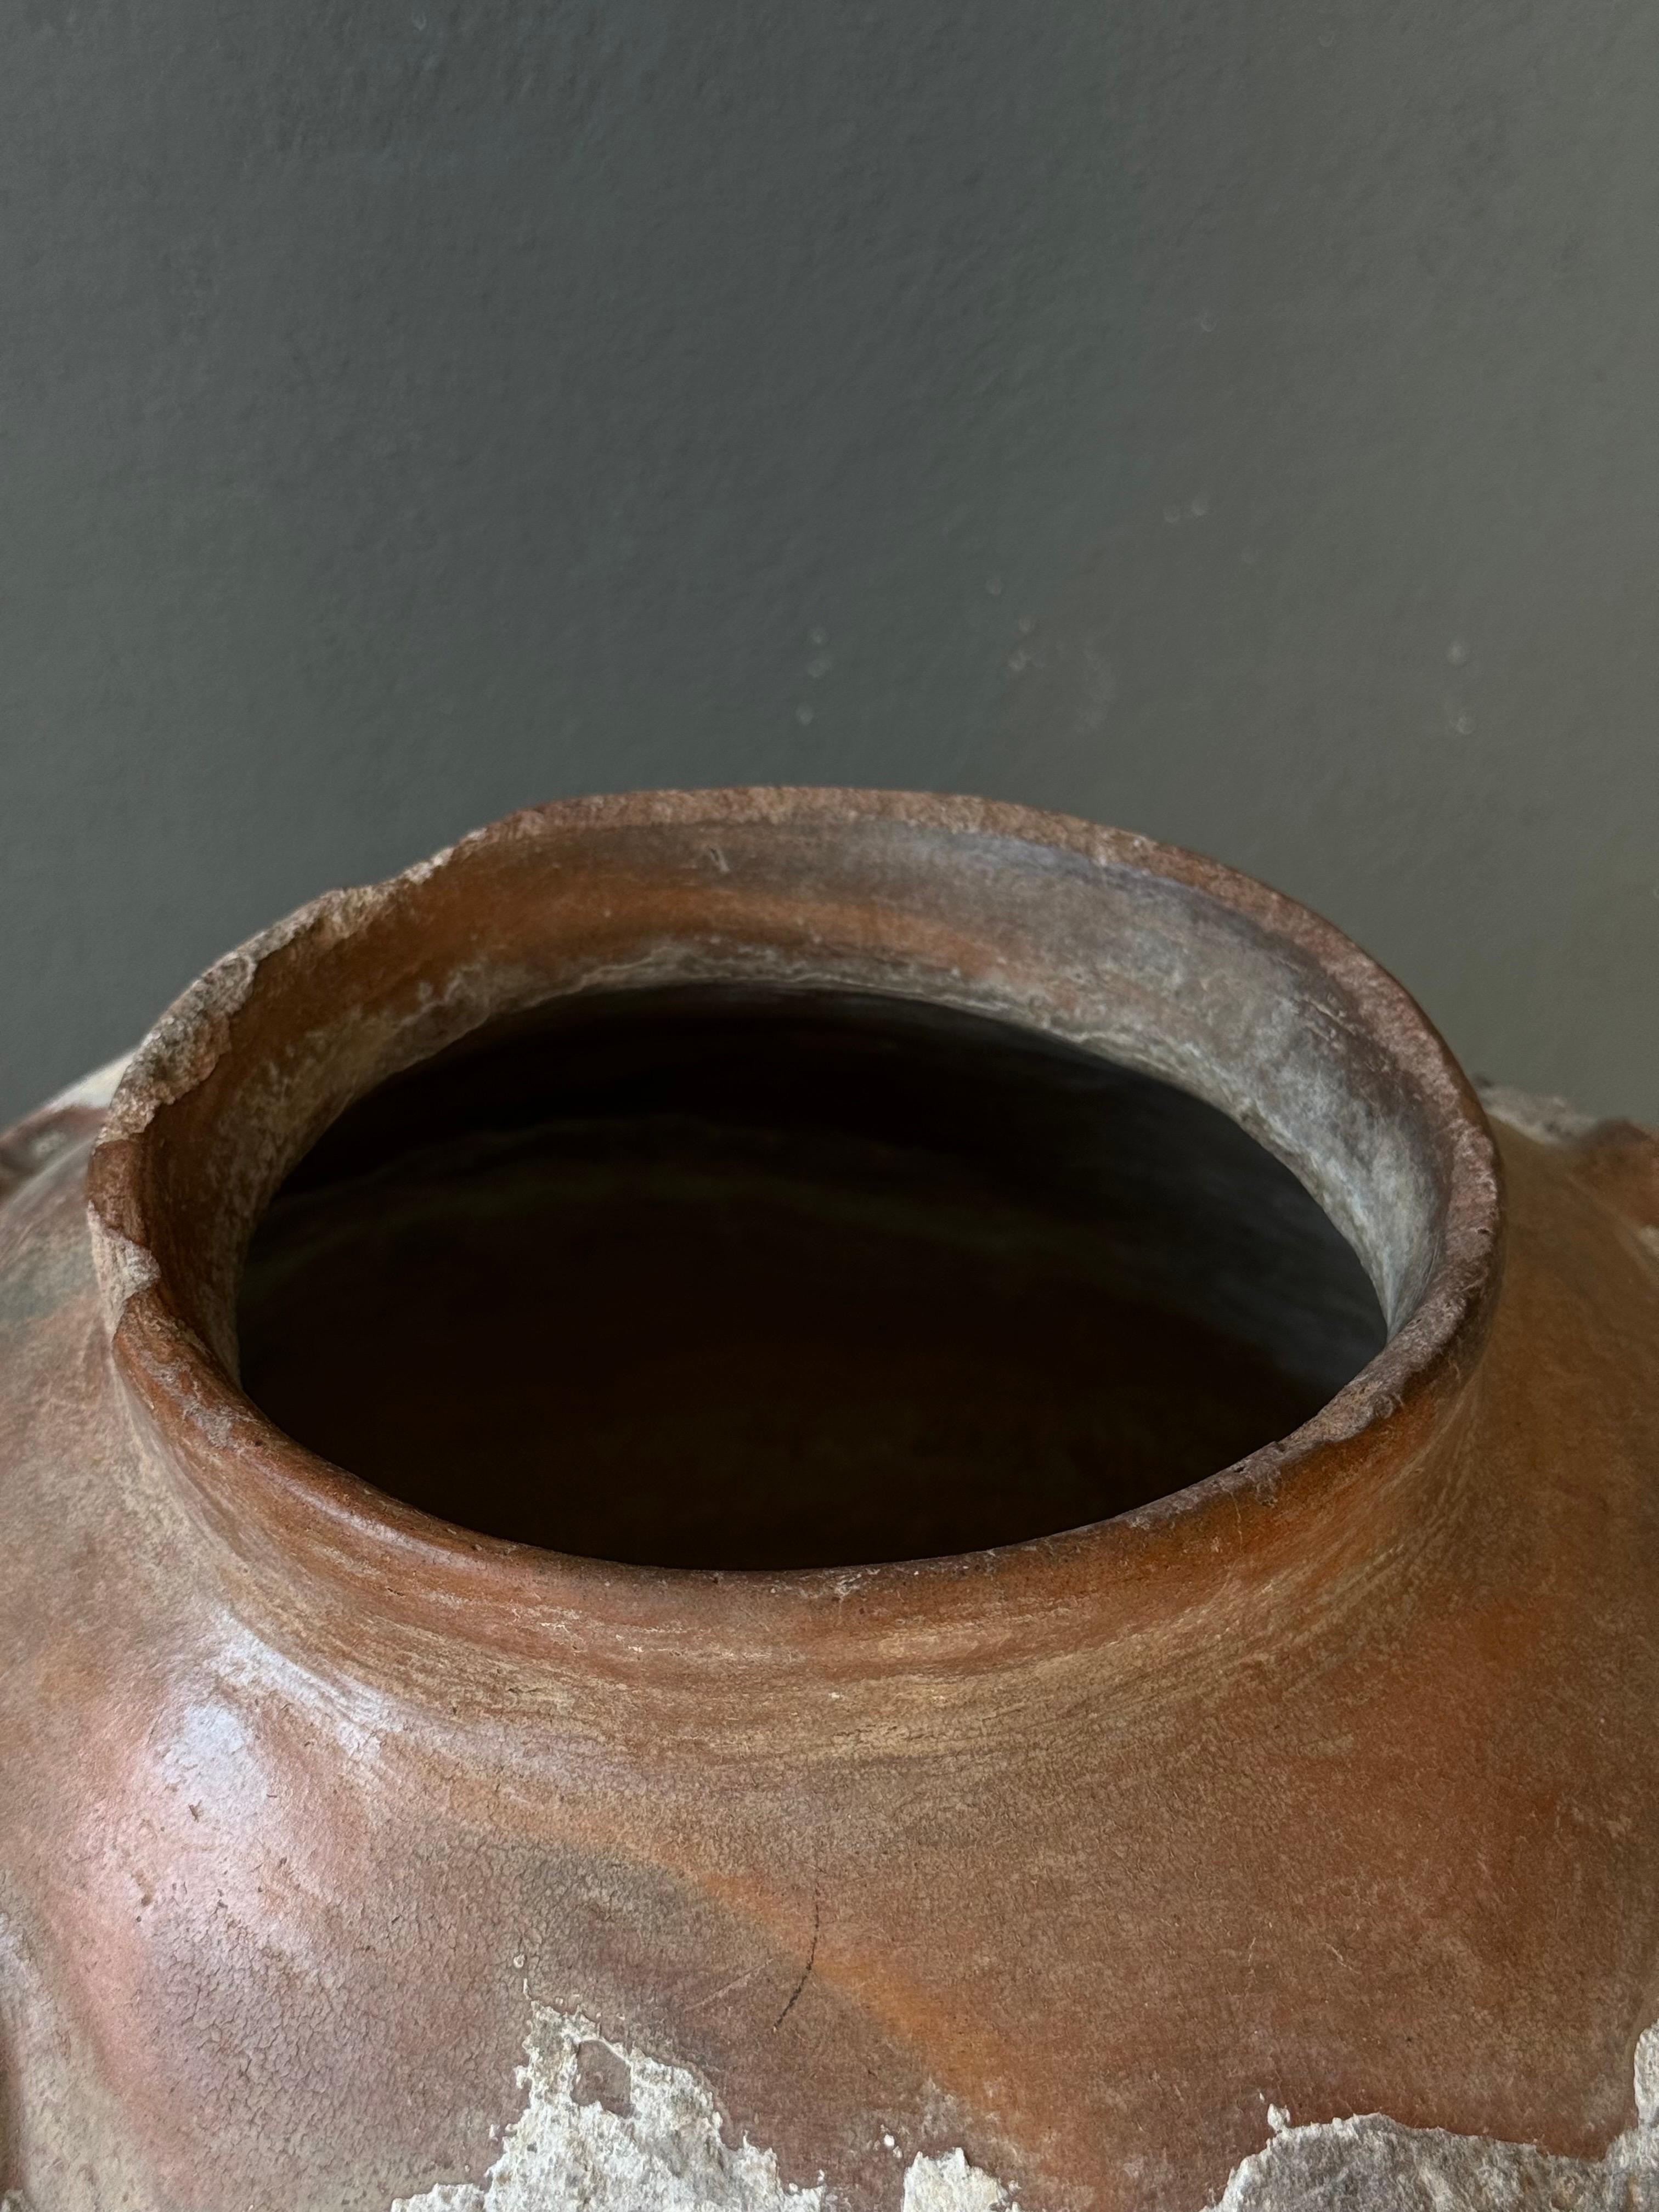 Primitive Terracotta Water Vessel From Central Michoacan, Mexico, Early 20th Century